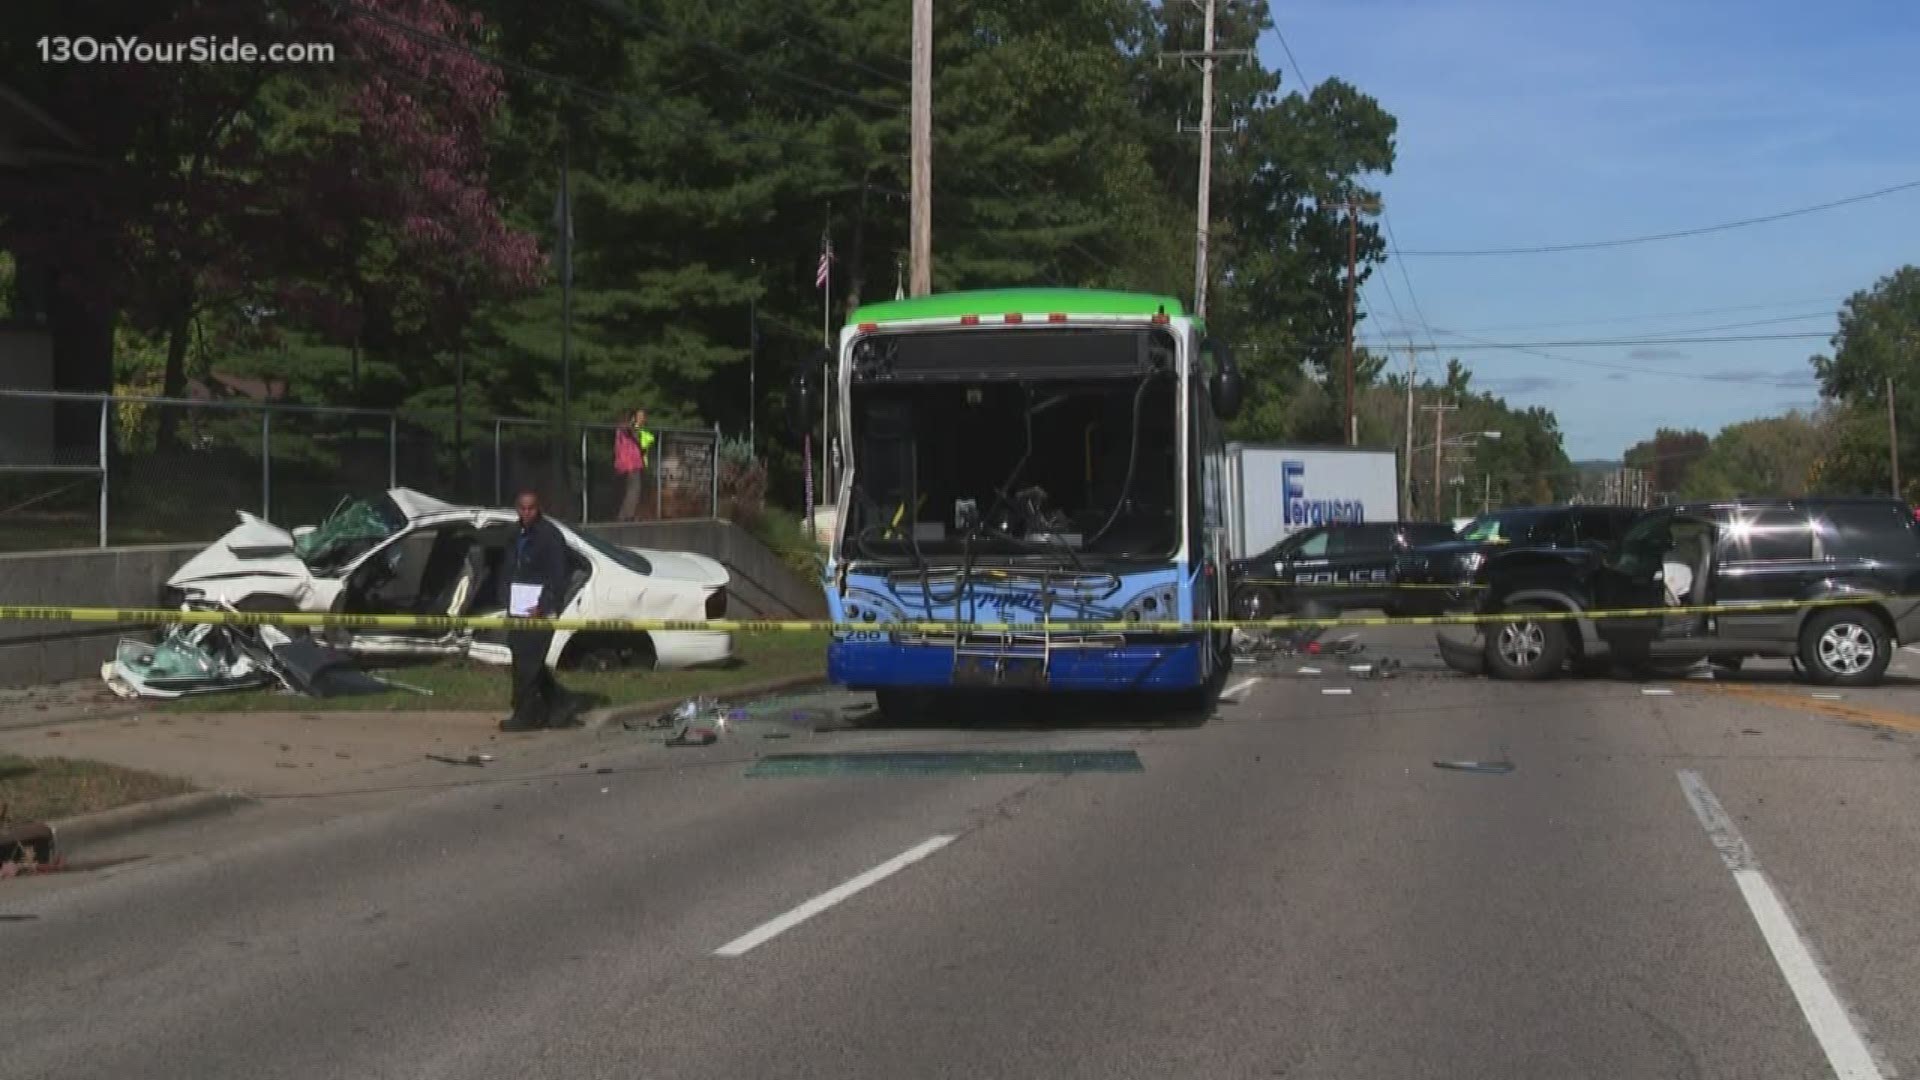 A Rapid bus and two other vehicles were involved in a crash Friday morning.